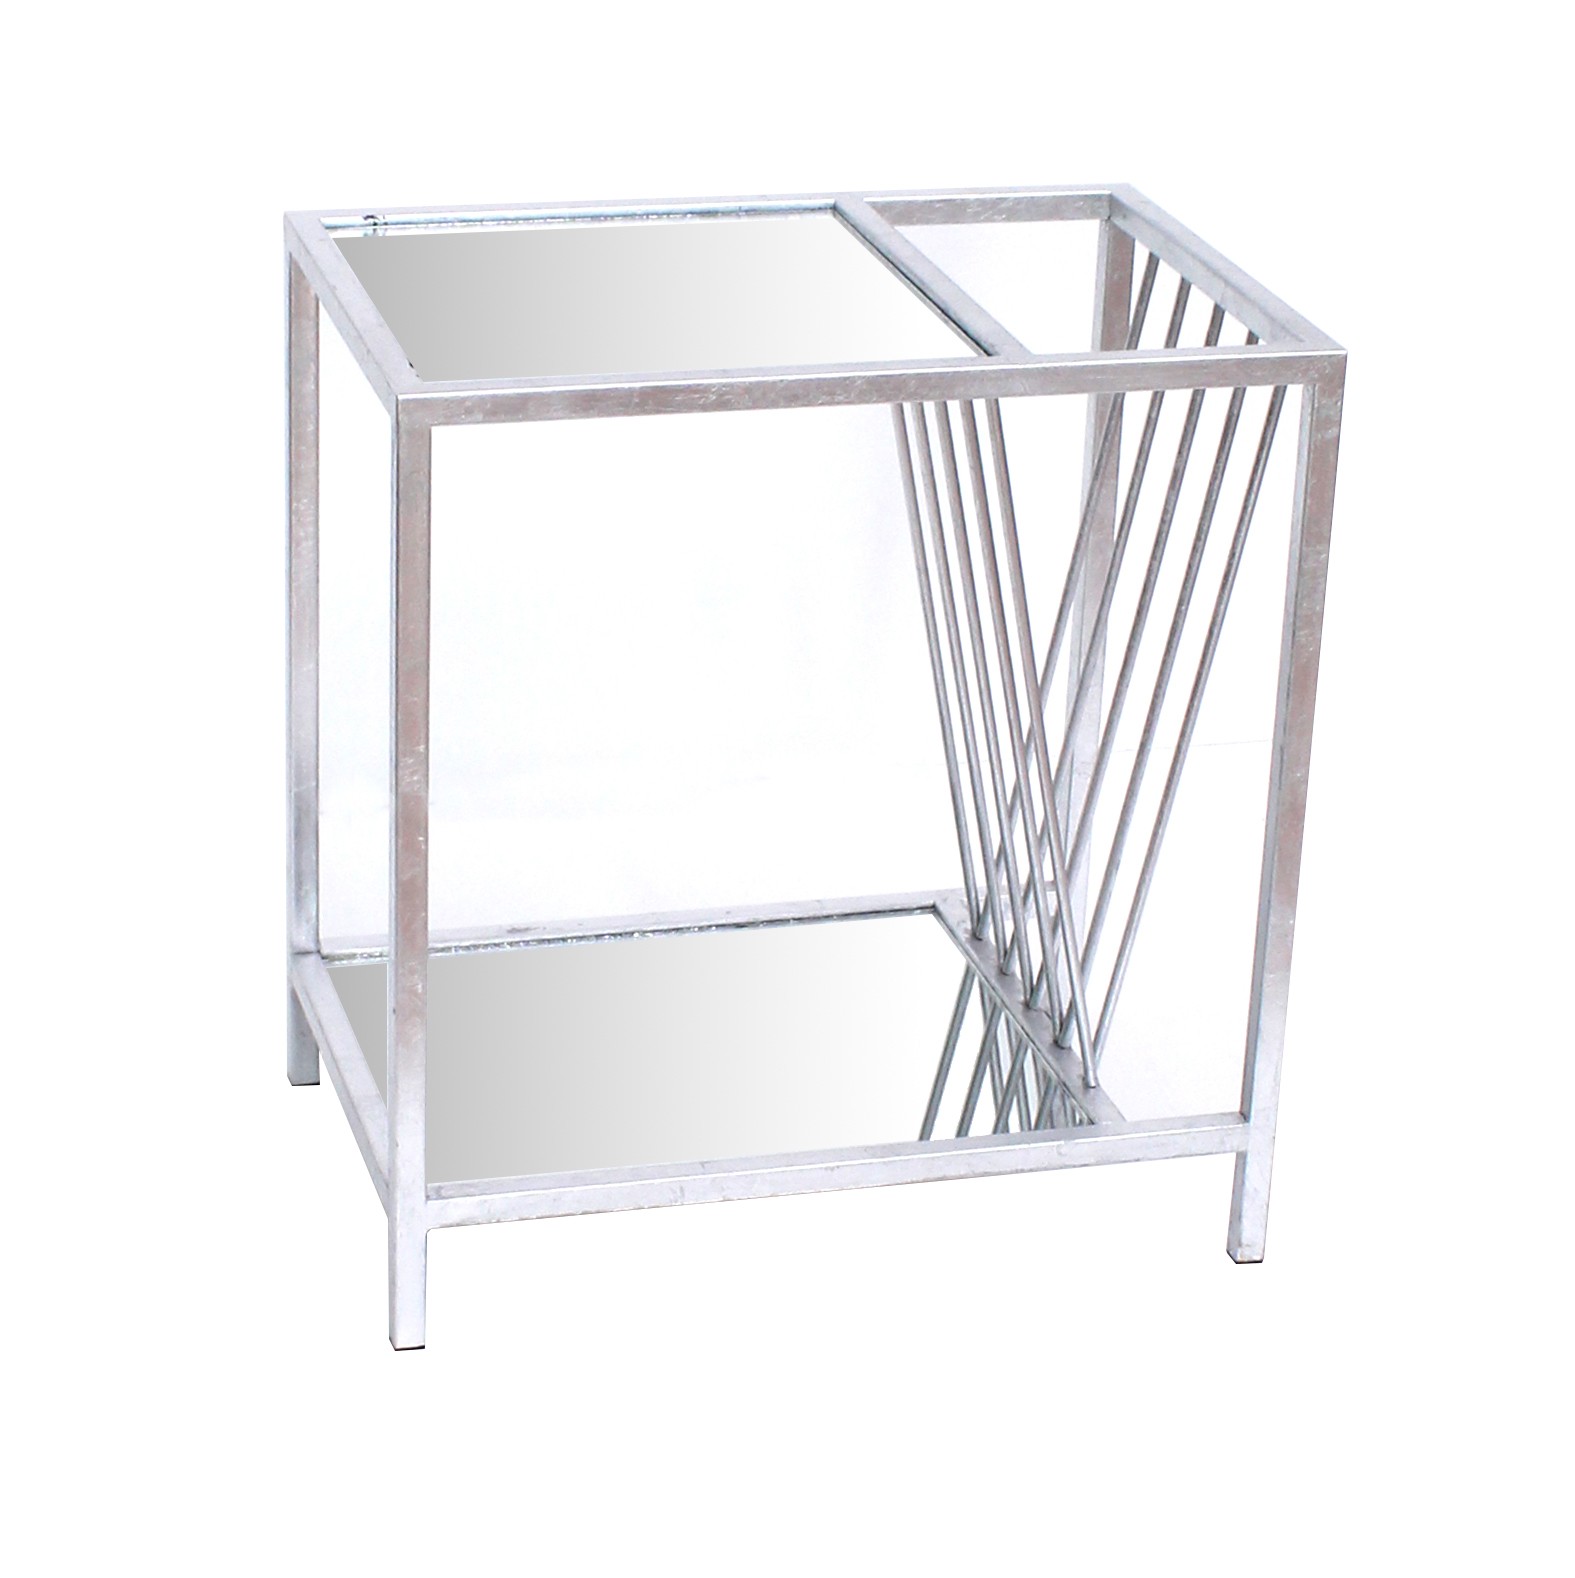 15" x 23" x 24" Silver Metal End Table